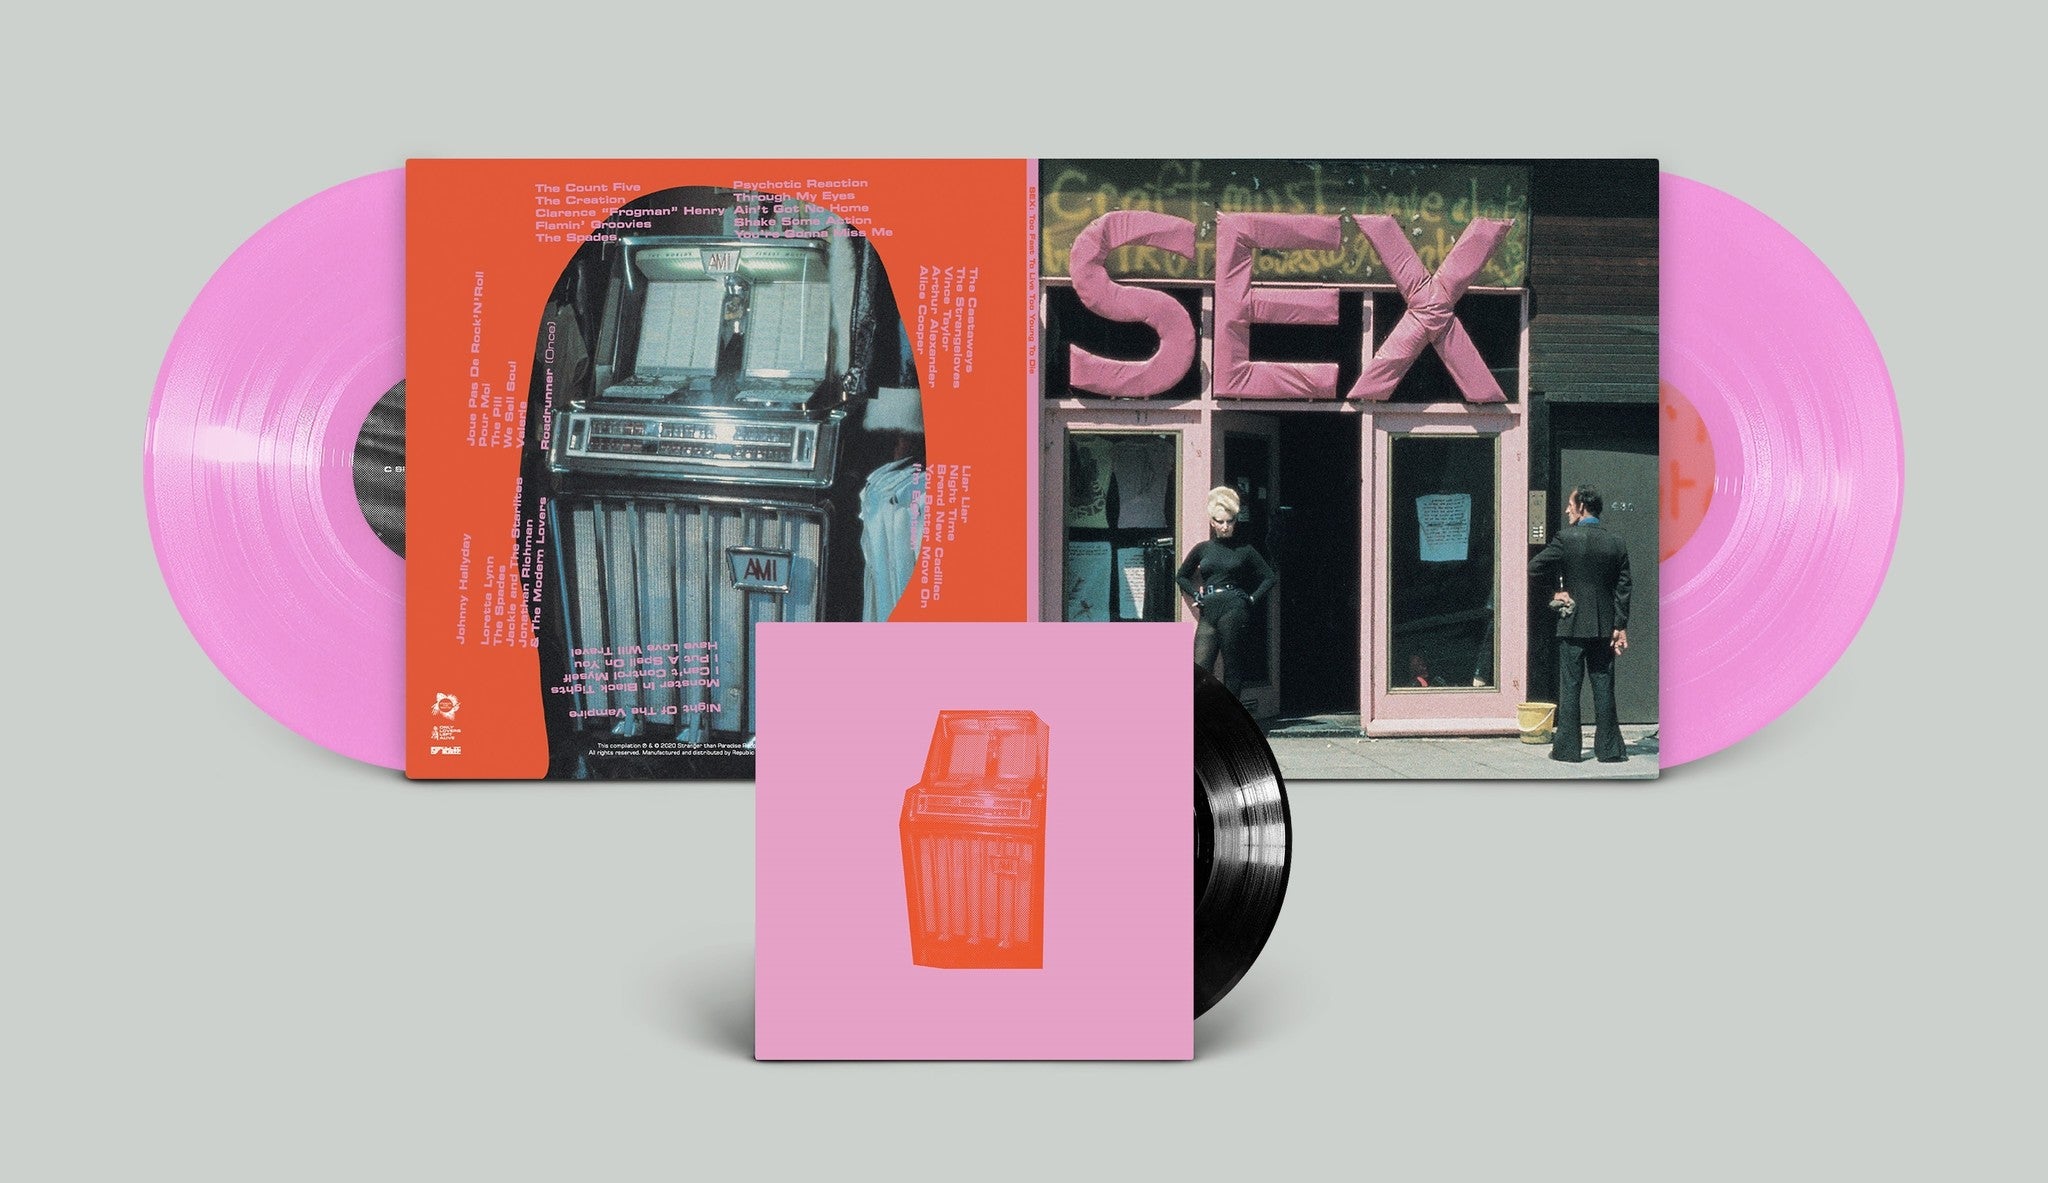 Sex Too Fast To Live To Young To Die Vinyl Ltd Ed Pink 2lp Gatefol